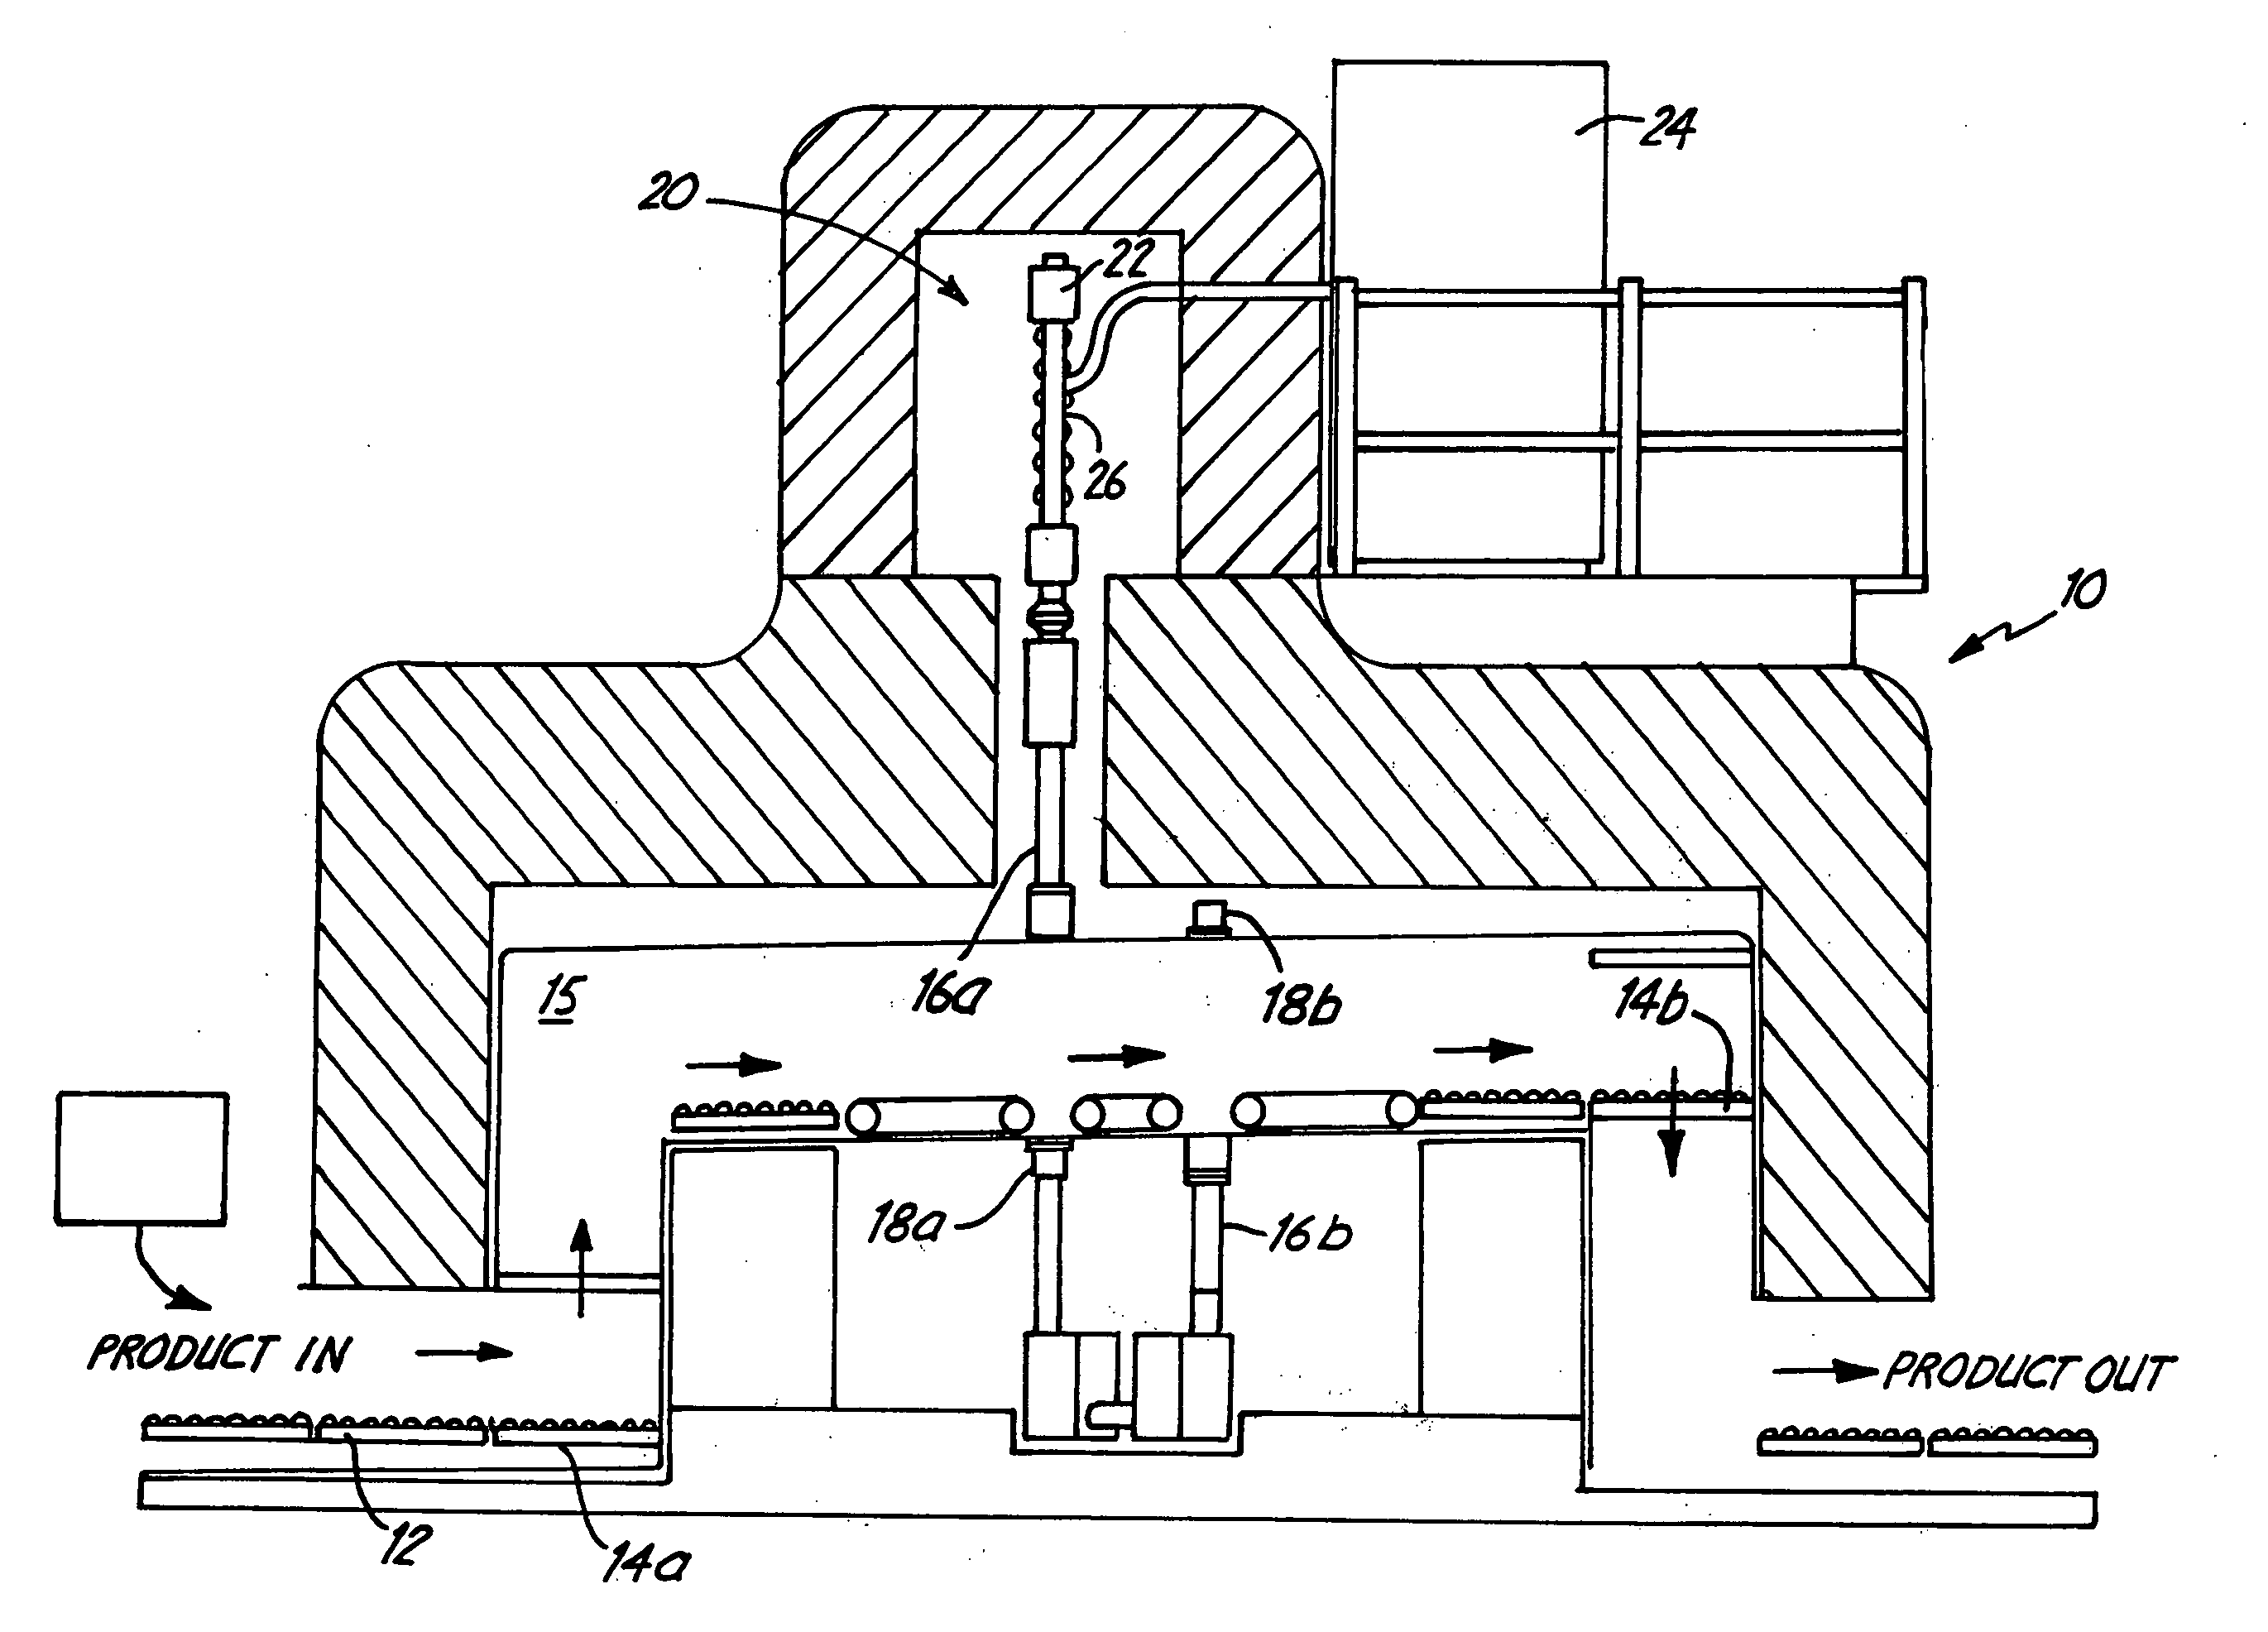 Irradiation system and method